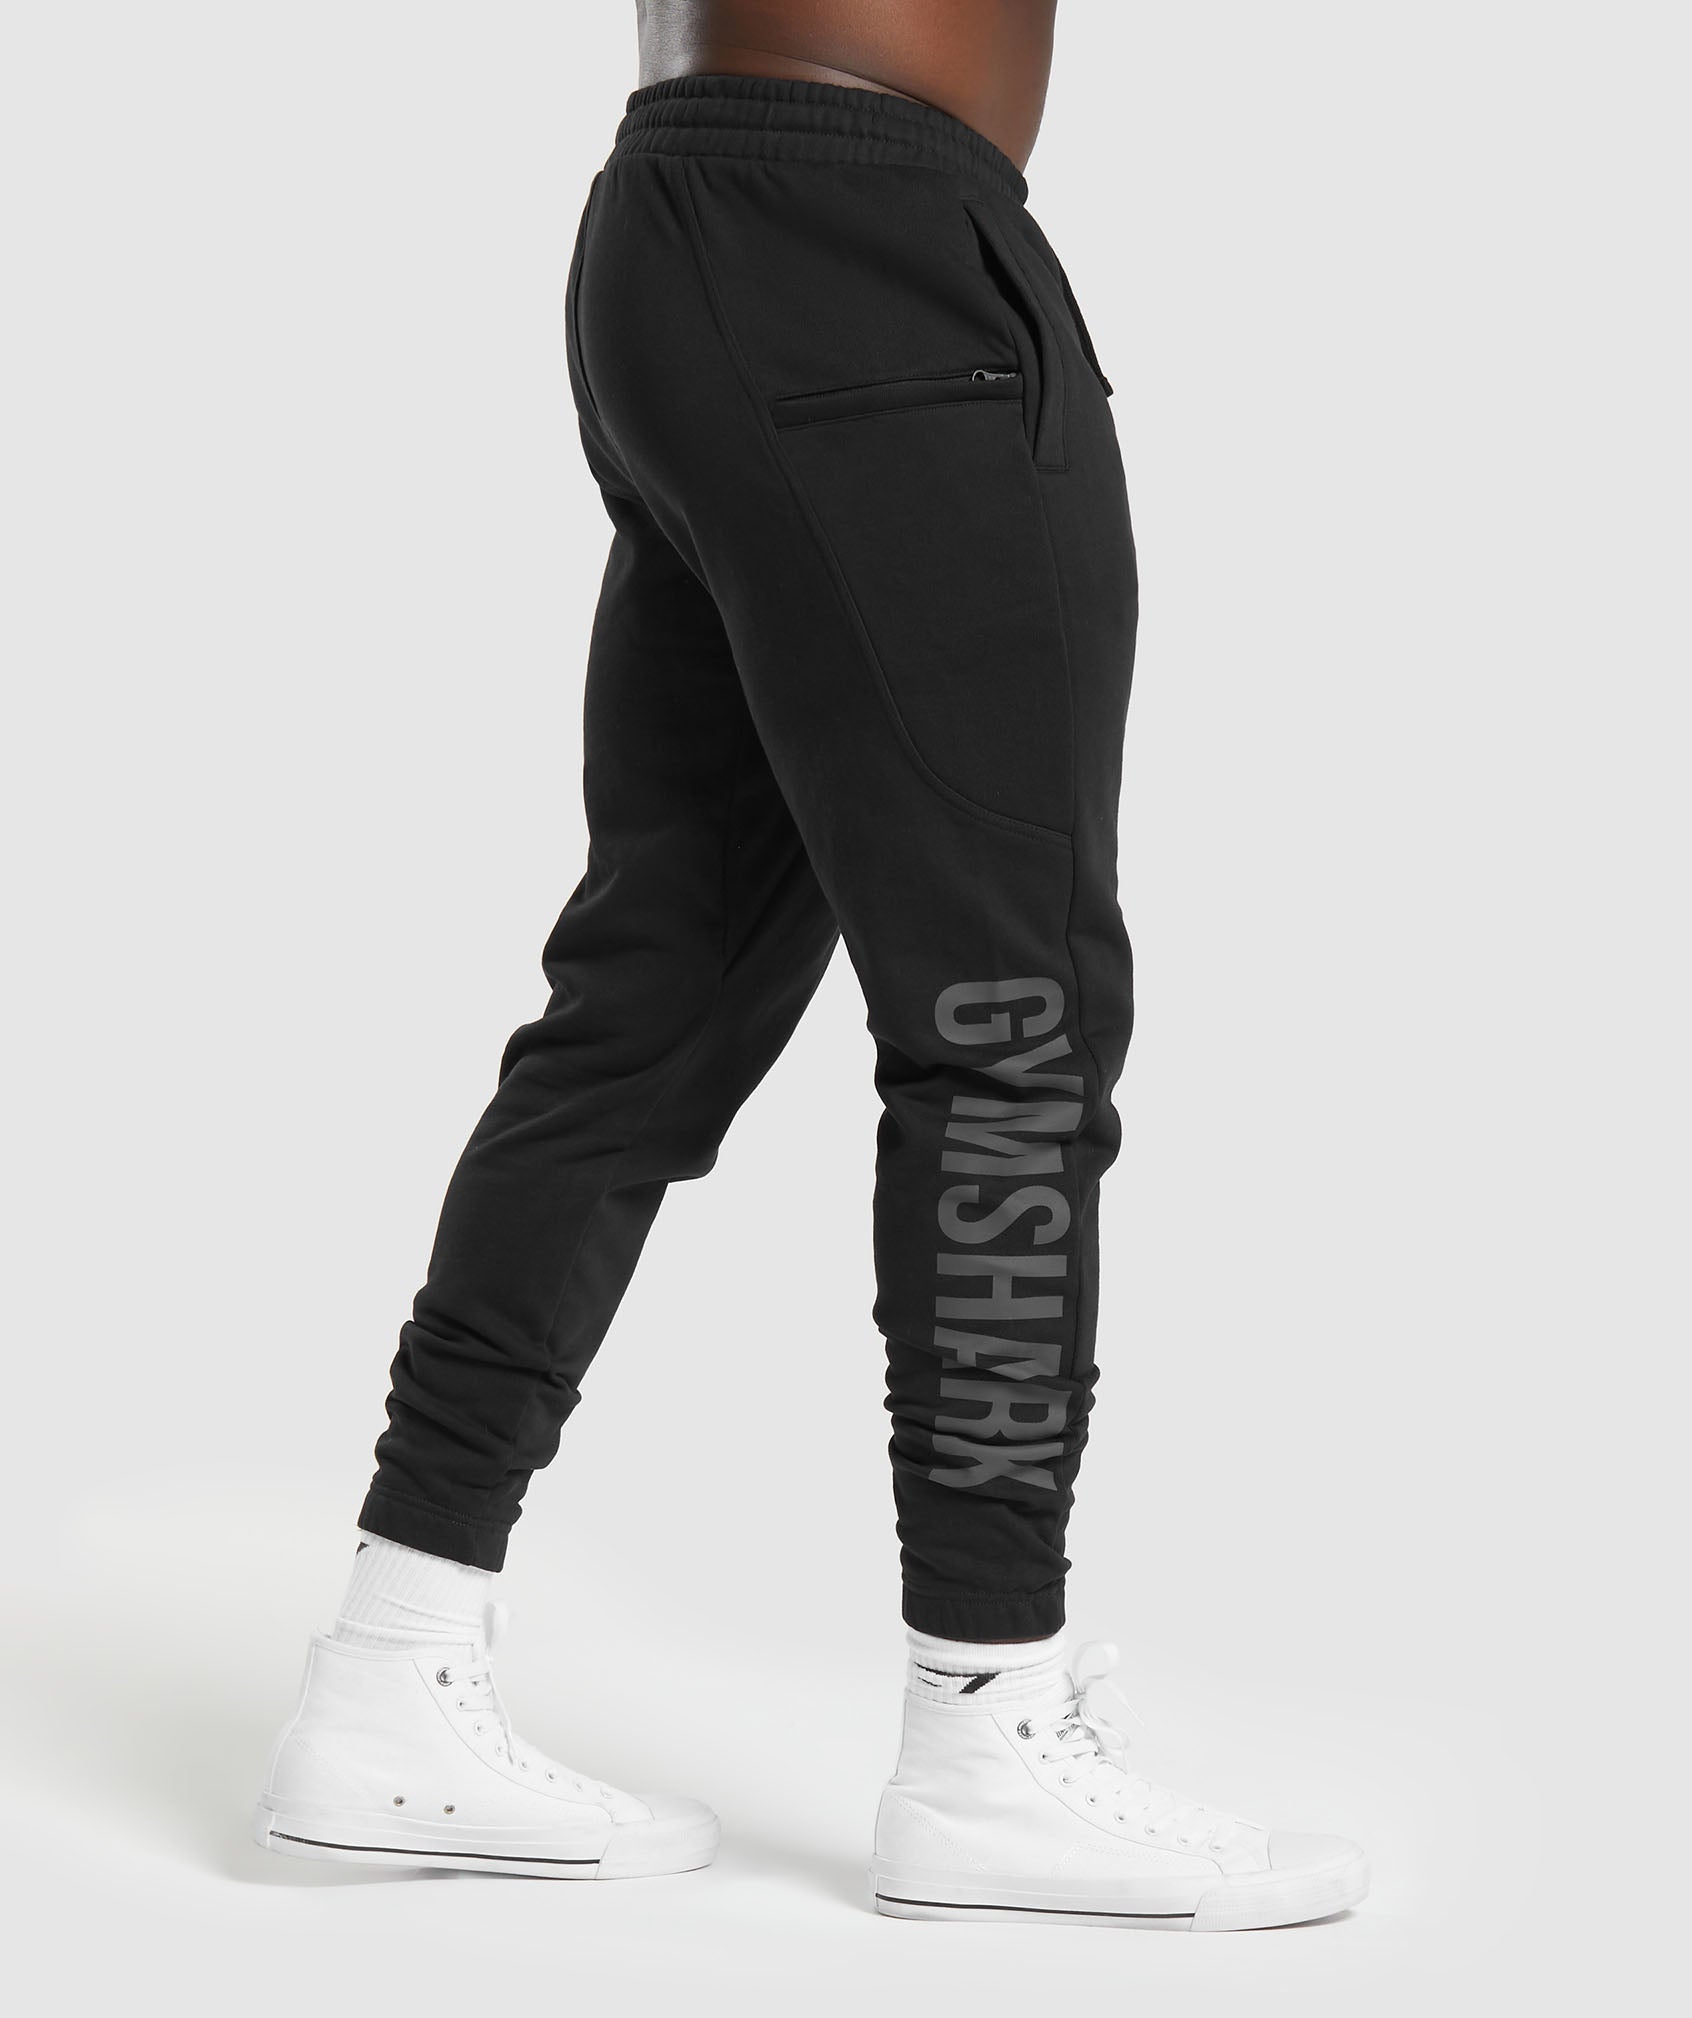 Power Joggers in Black - view 3